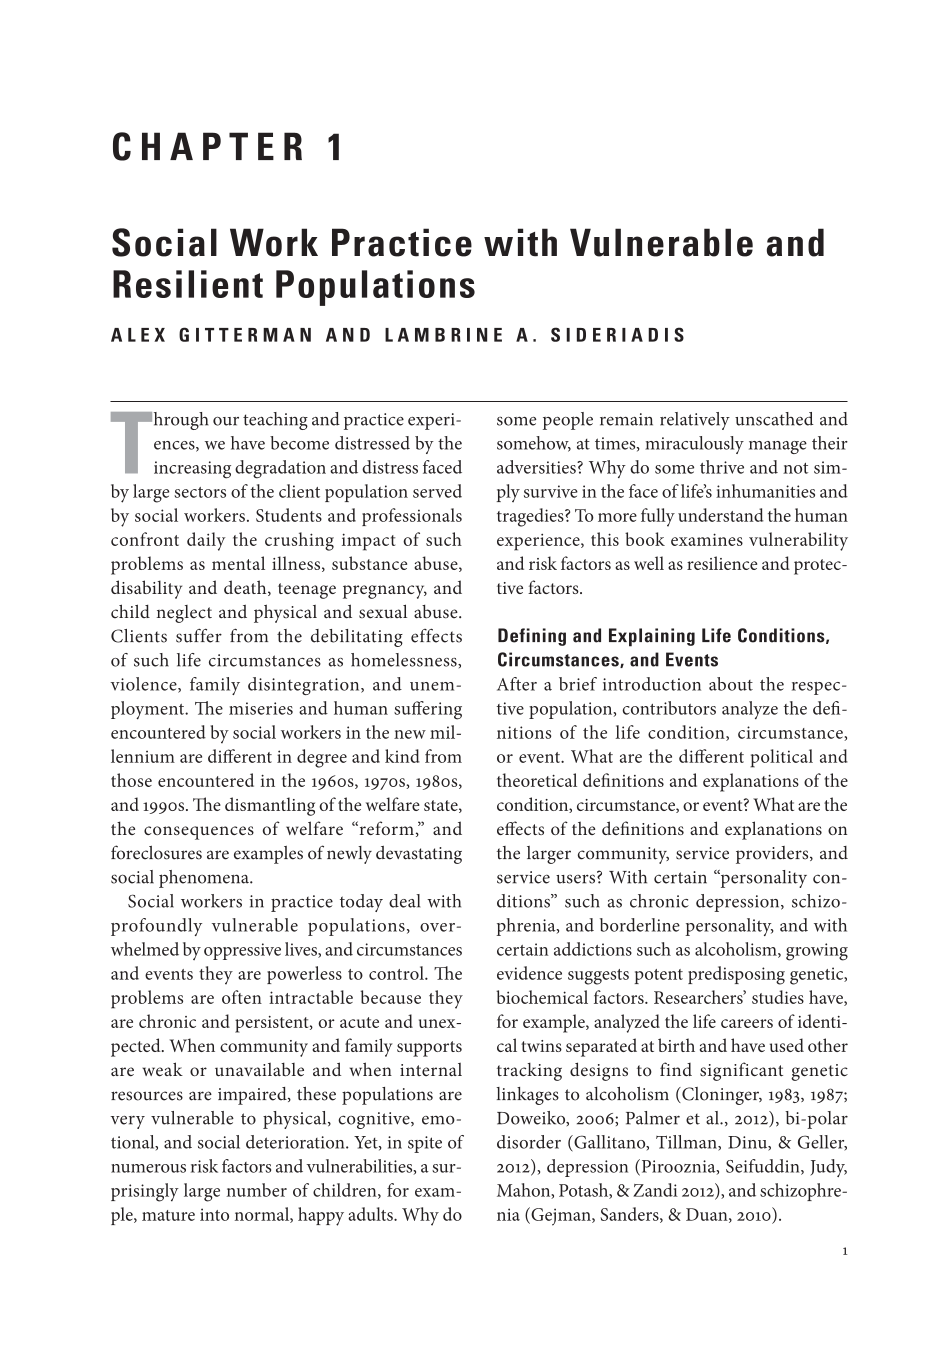 Handbook of Social Work Practice with Vulnerable and Resilient Populations, 3rd ed. page 1